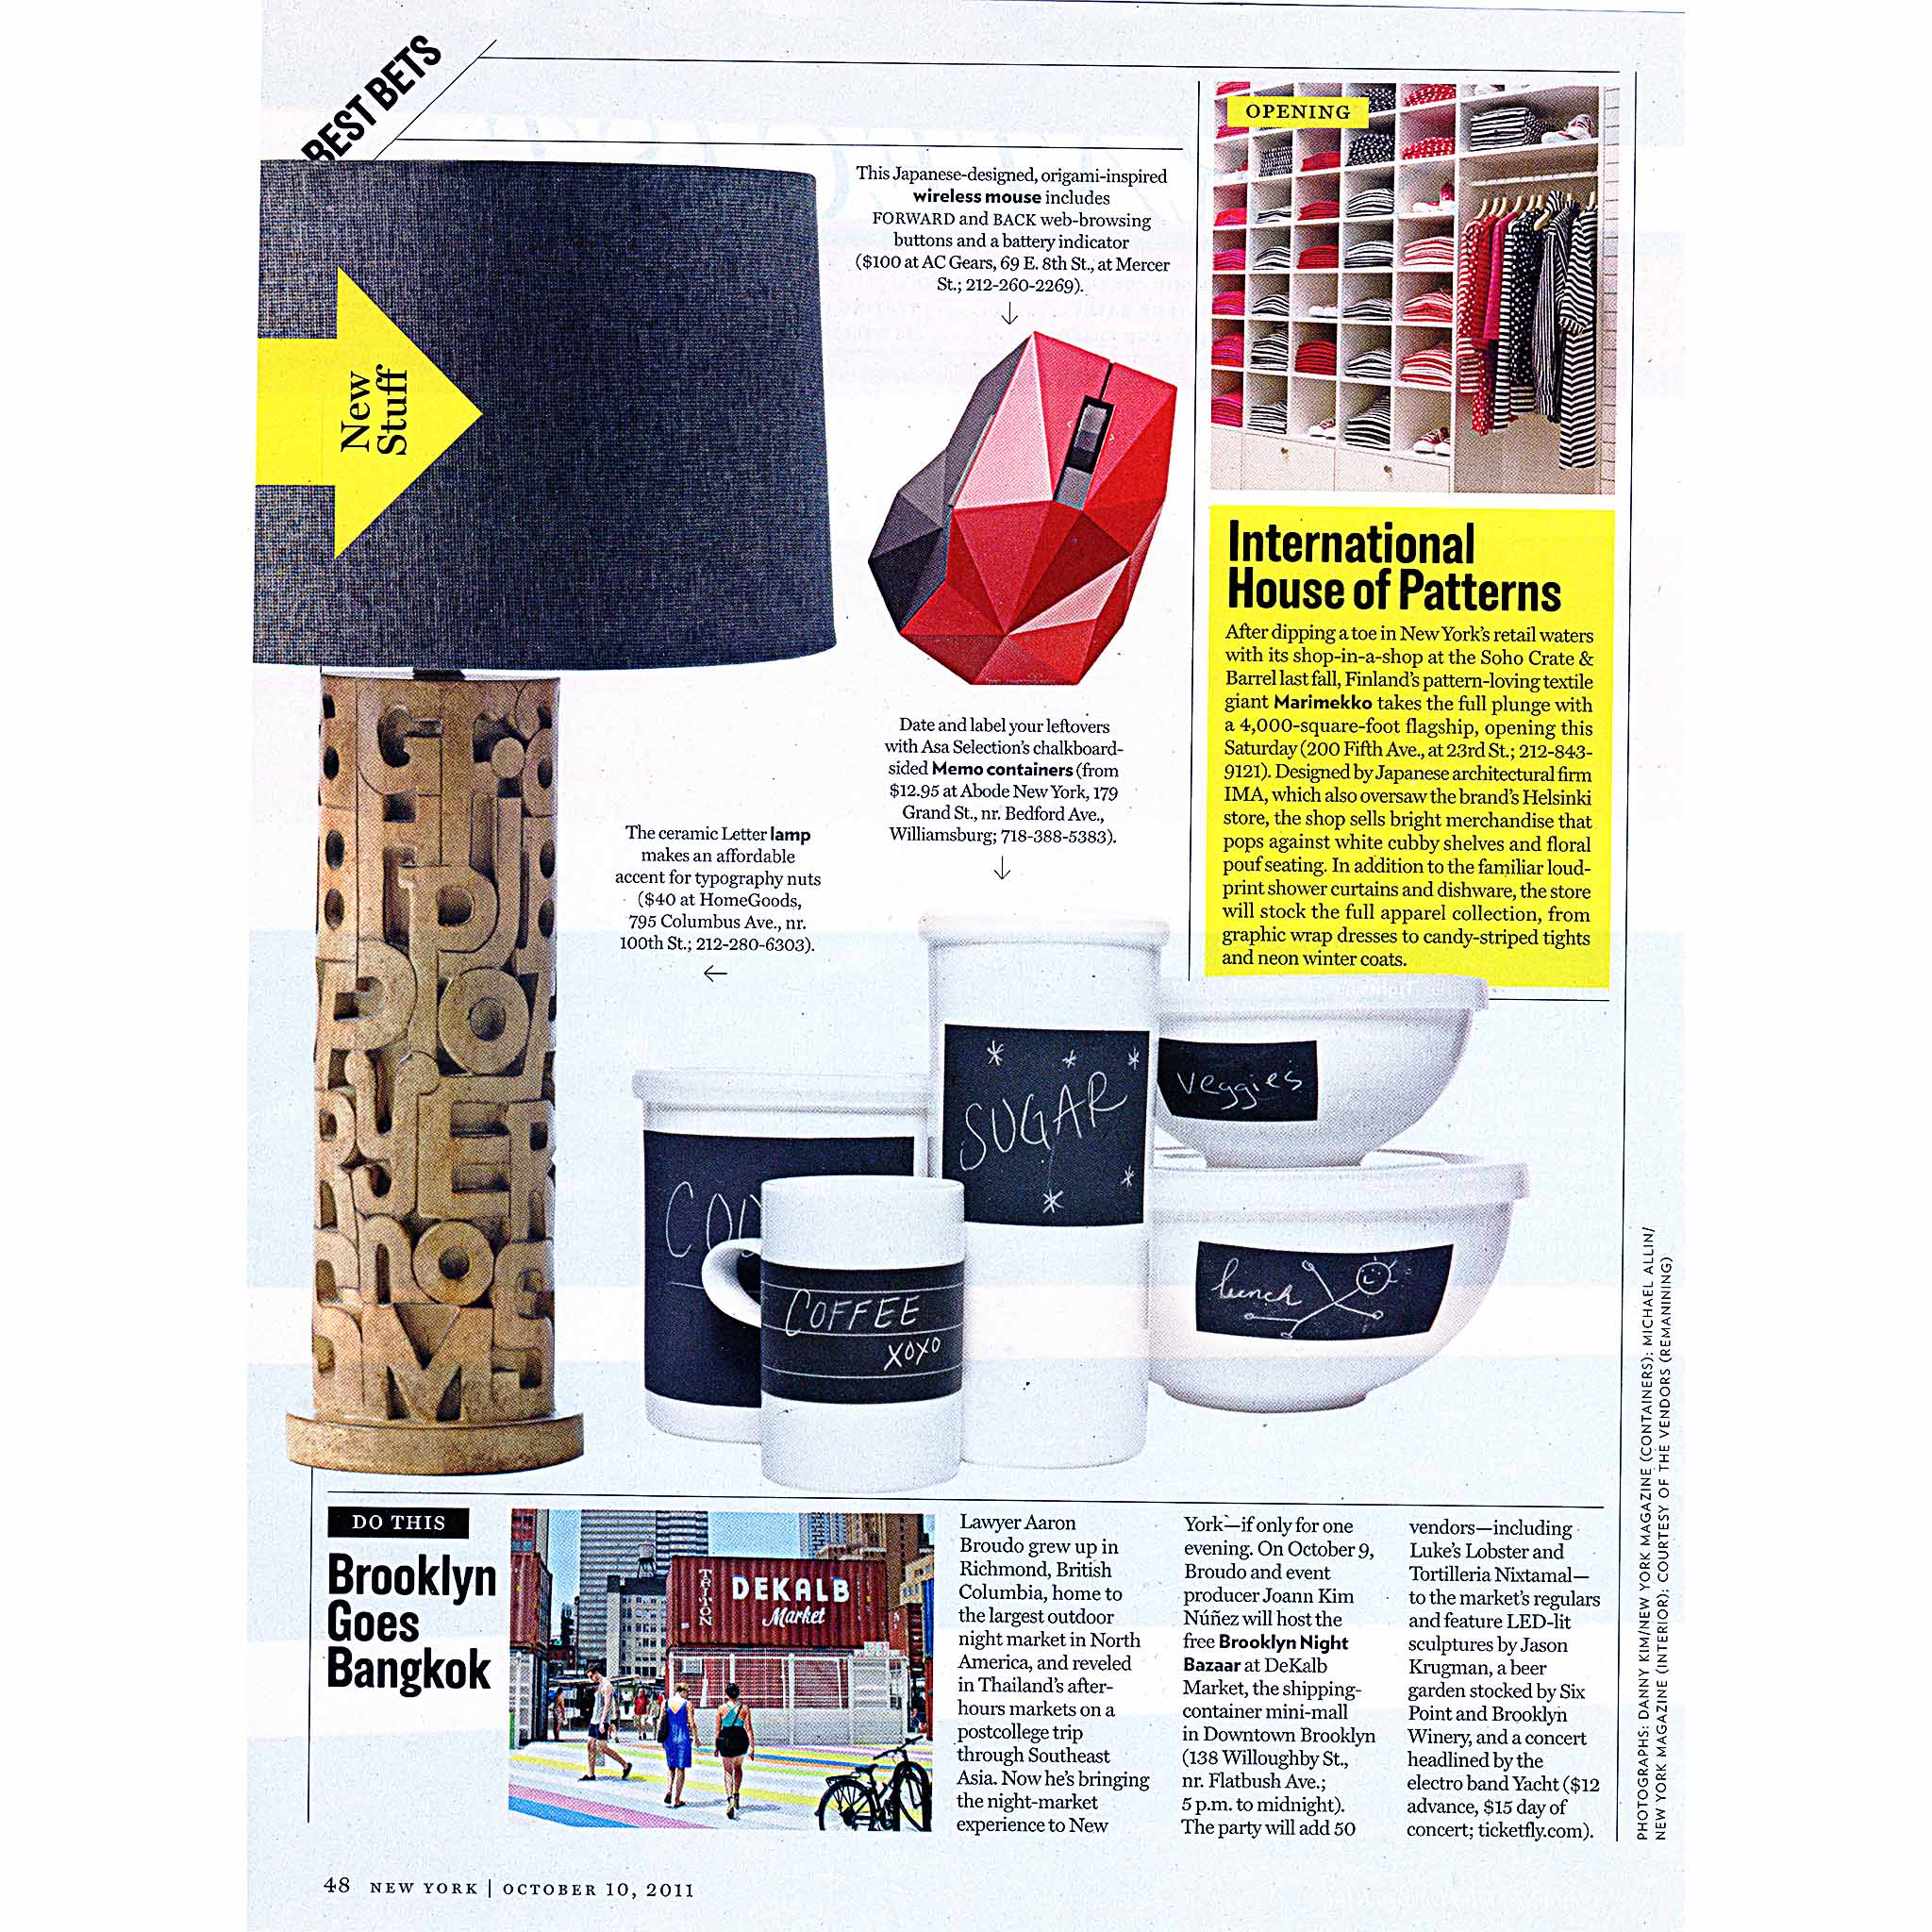 New York Magazine, "Best Bets: New Stuff," ASA-Selection Memo container collection, October 10, 2011 (online: September 29, 2011). 